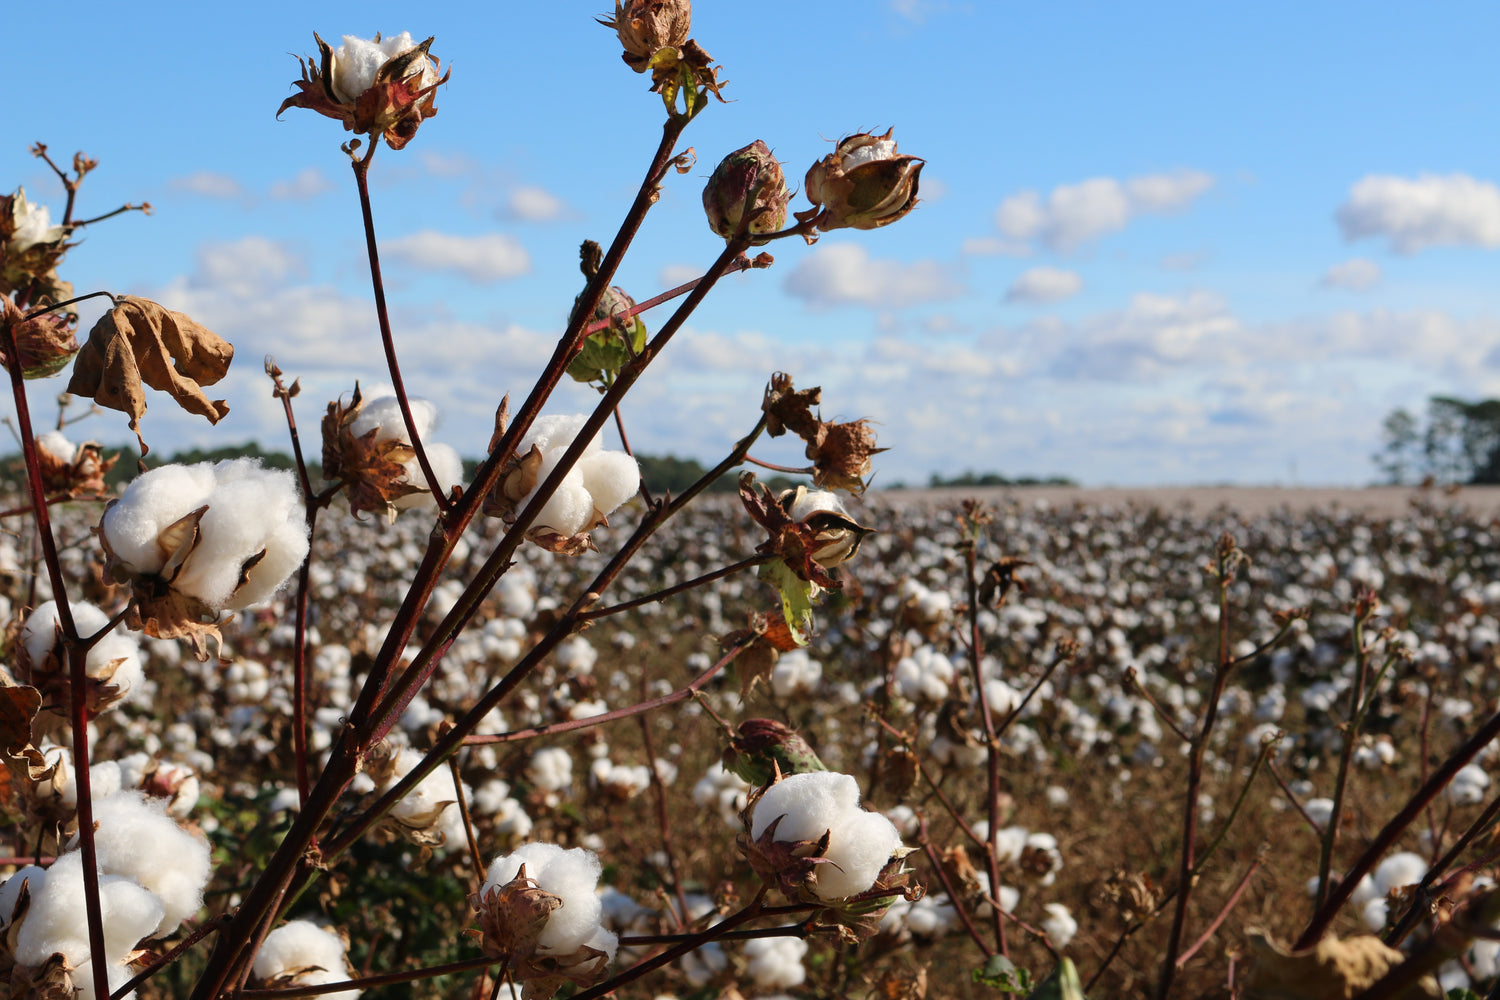 Landscape image of an organic cotton field. This image represents the sustainable and environmentally-friendly sources teeone utilises for its garments.